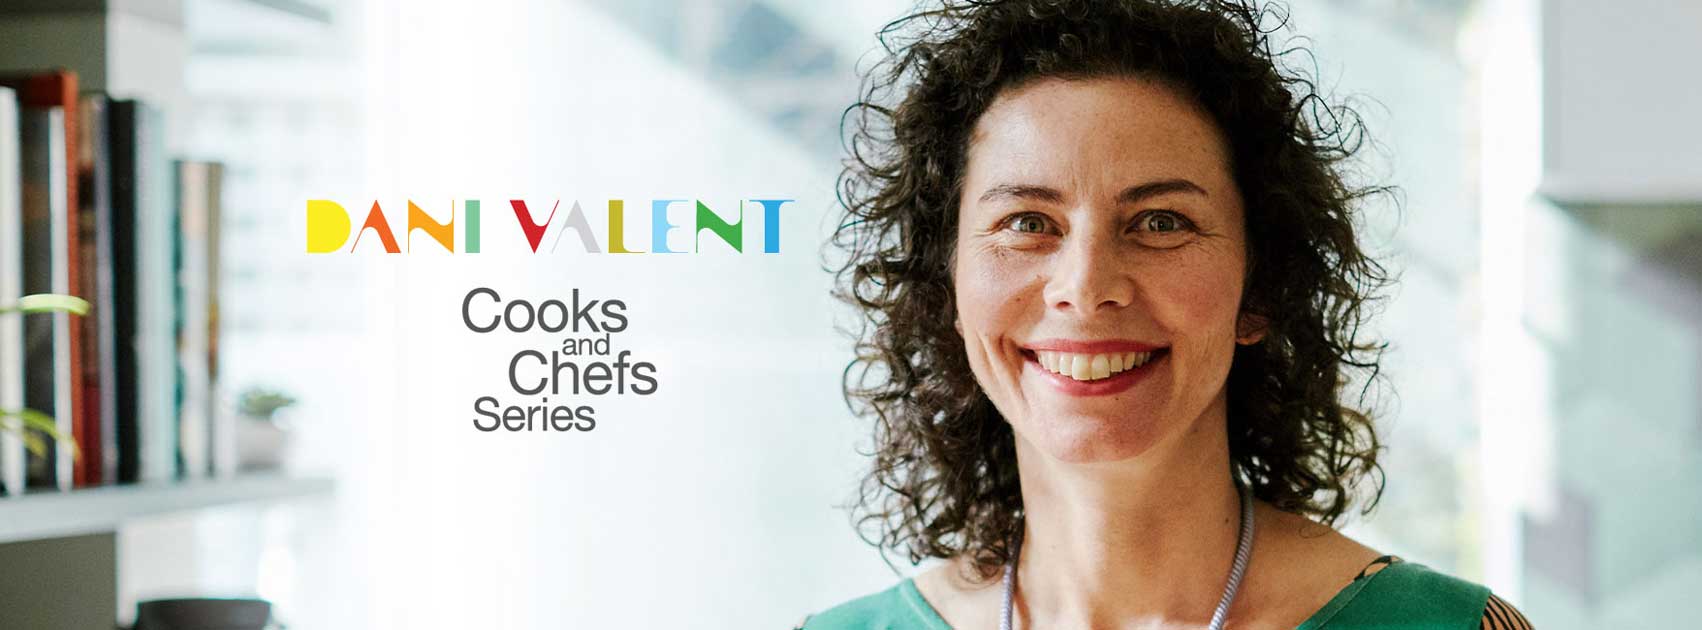 Cooks and Chefs series with Dani Valent